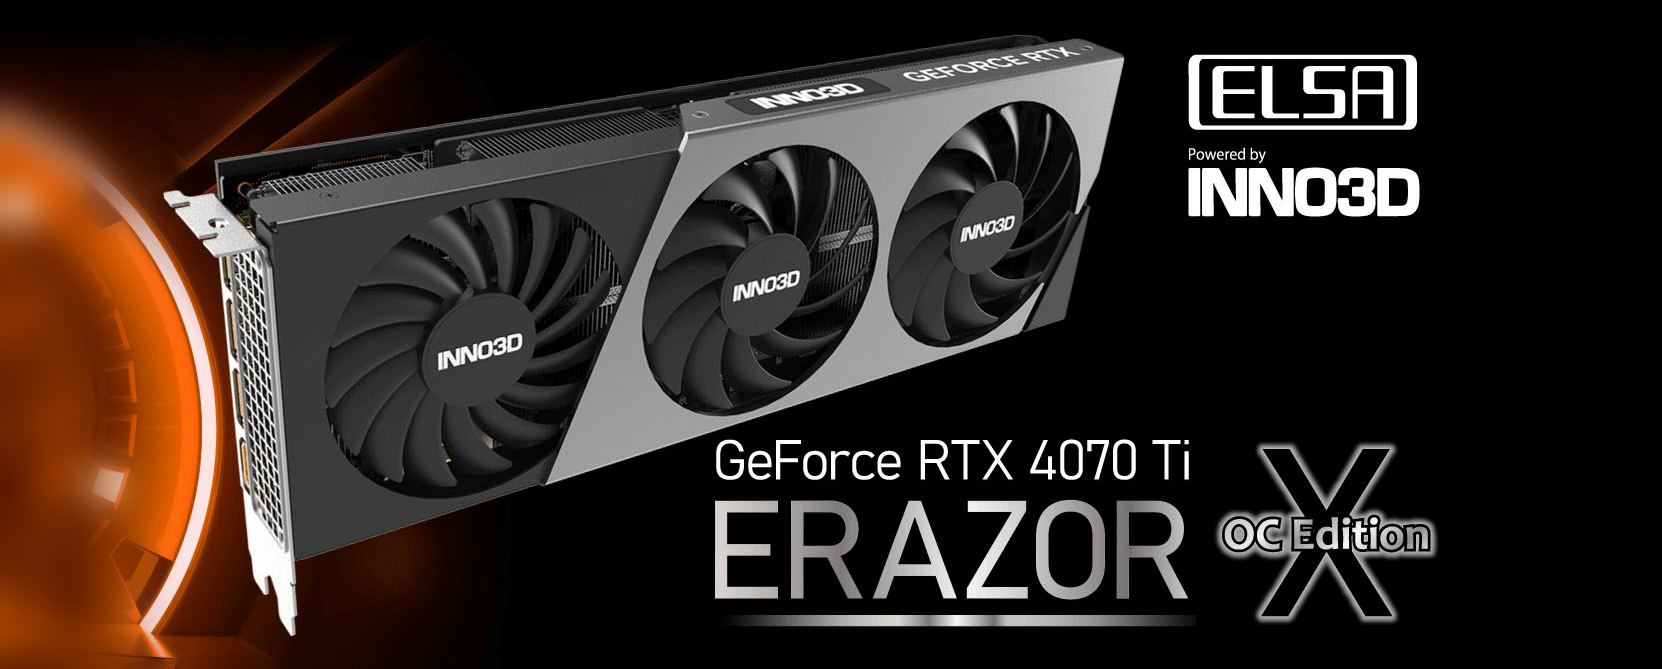 ELSA announces GeForce RTX 4070 Ti graphics card early